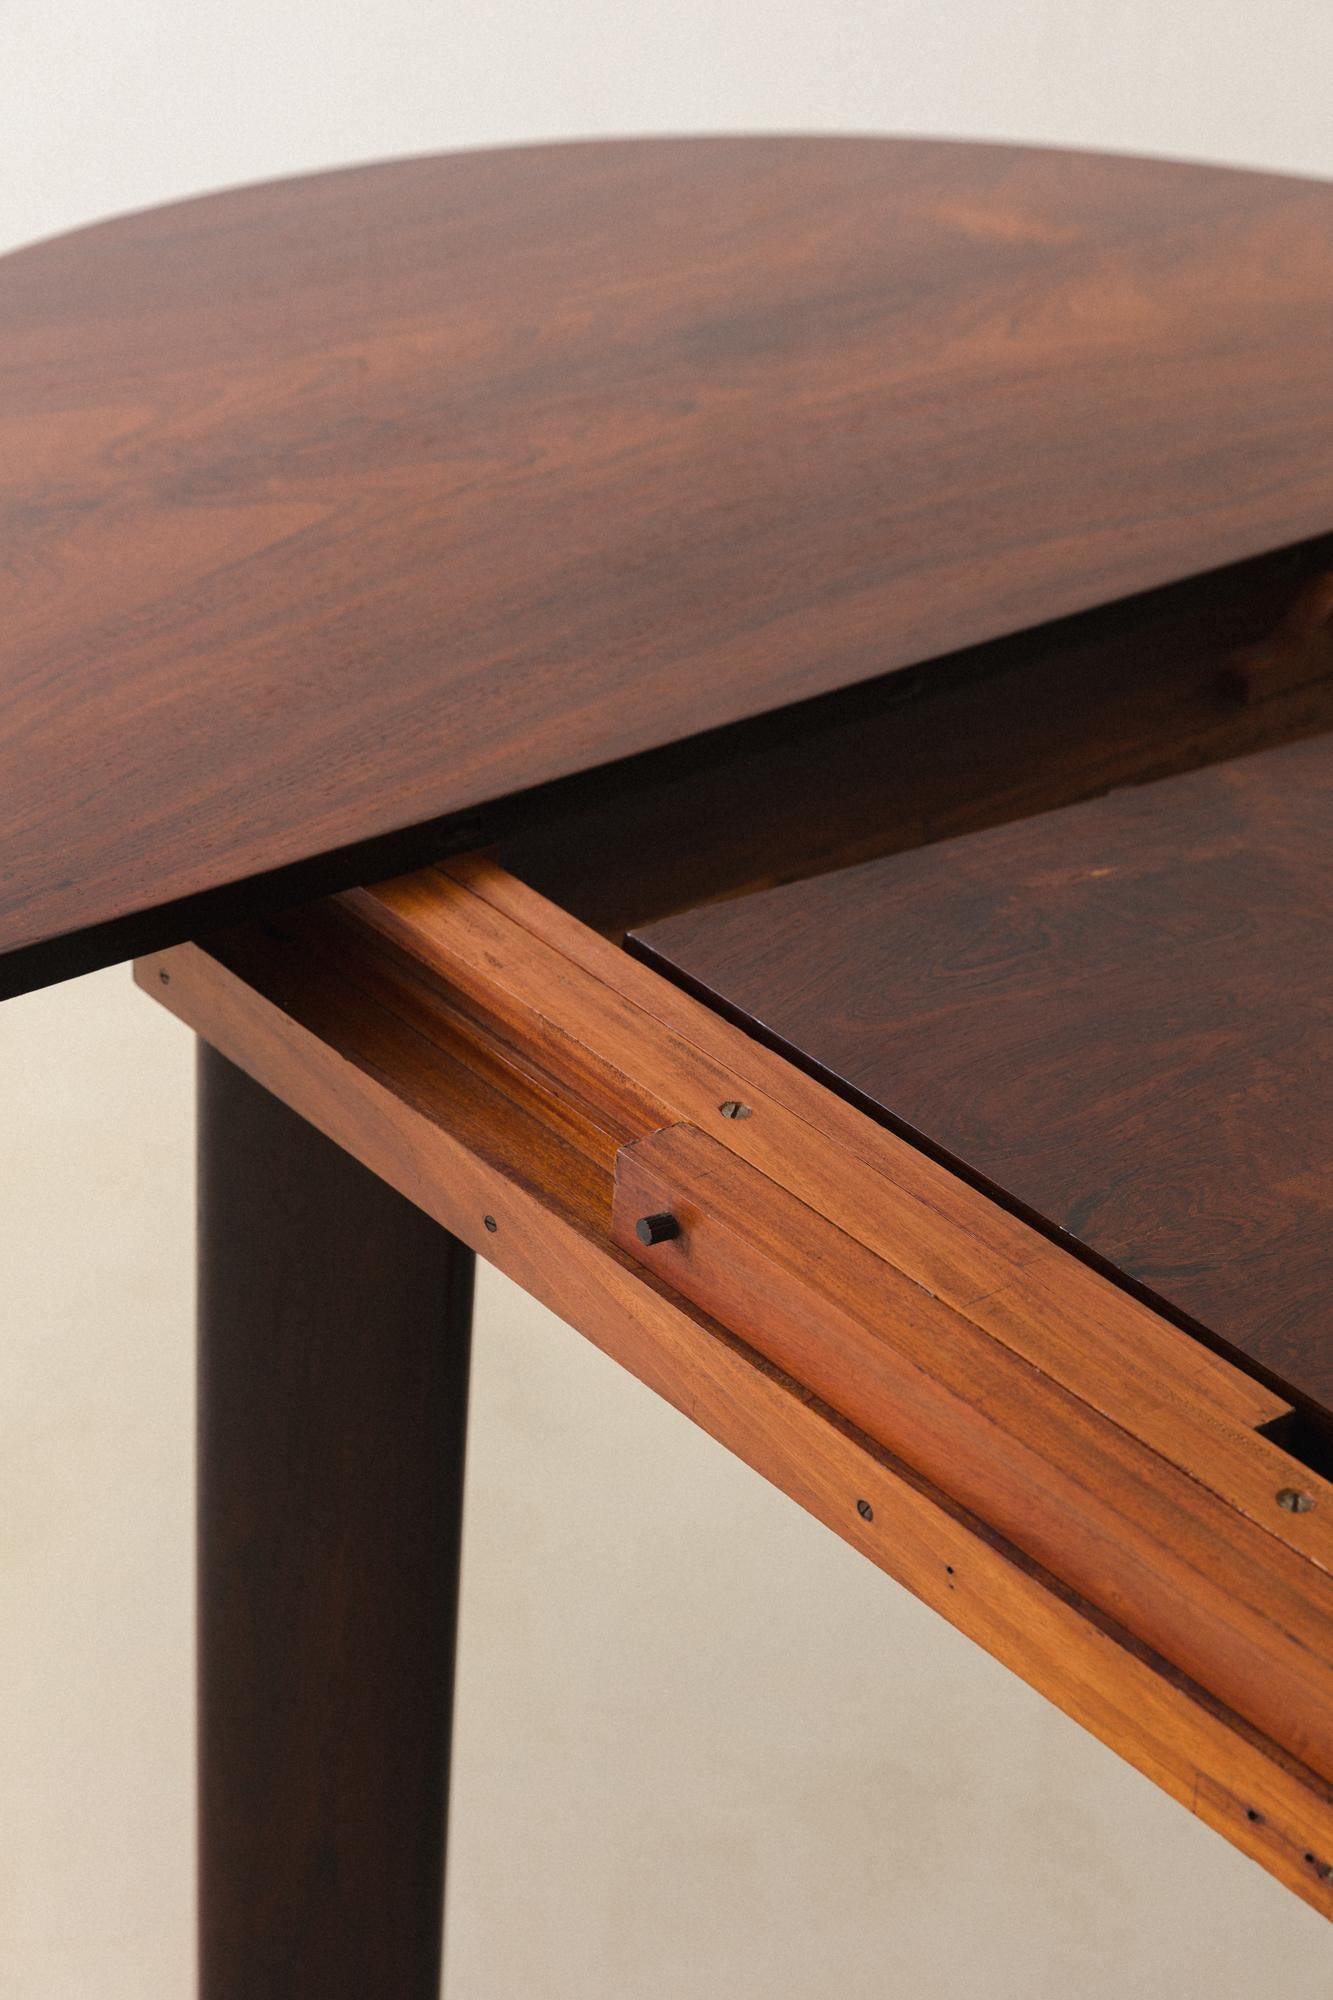 Celina Decorações, Brazilian Midcentury Dining Table in Rosewood, 1960s In Good Condition For Sale In New York, NY